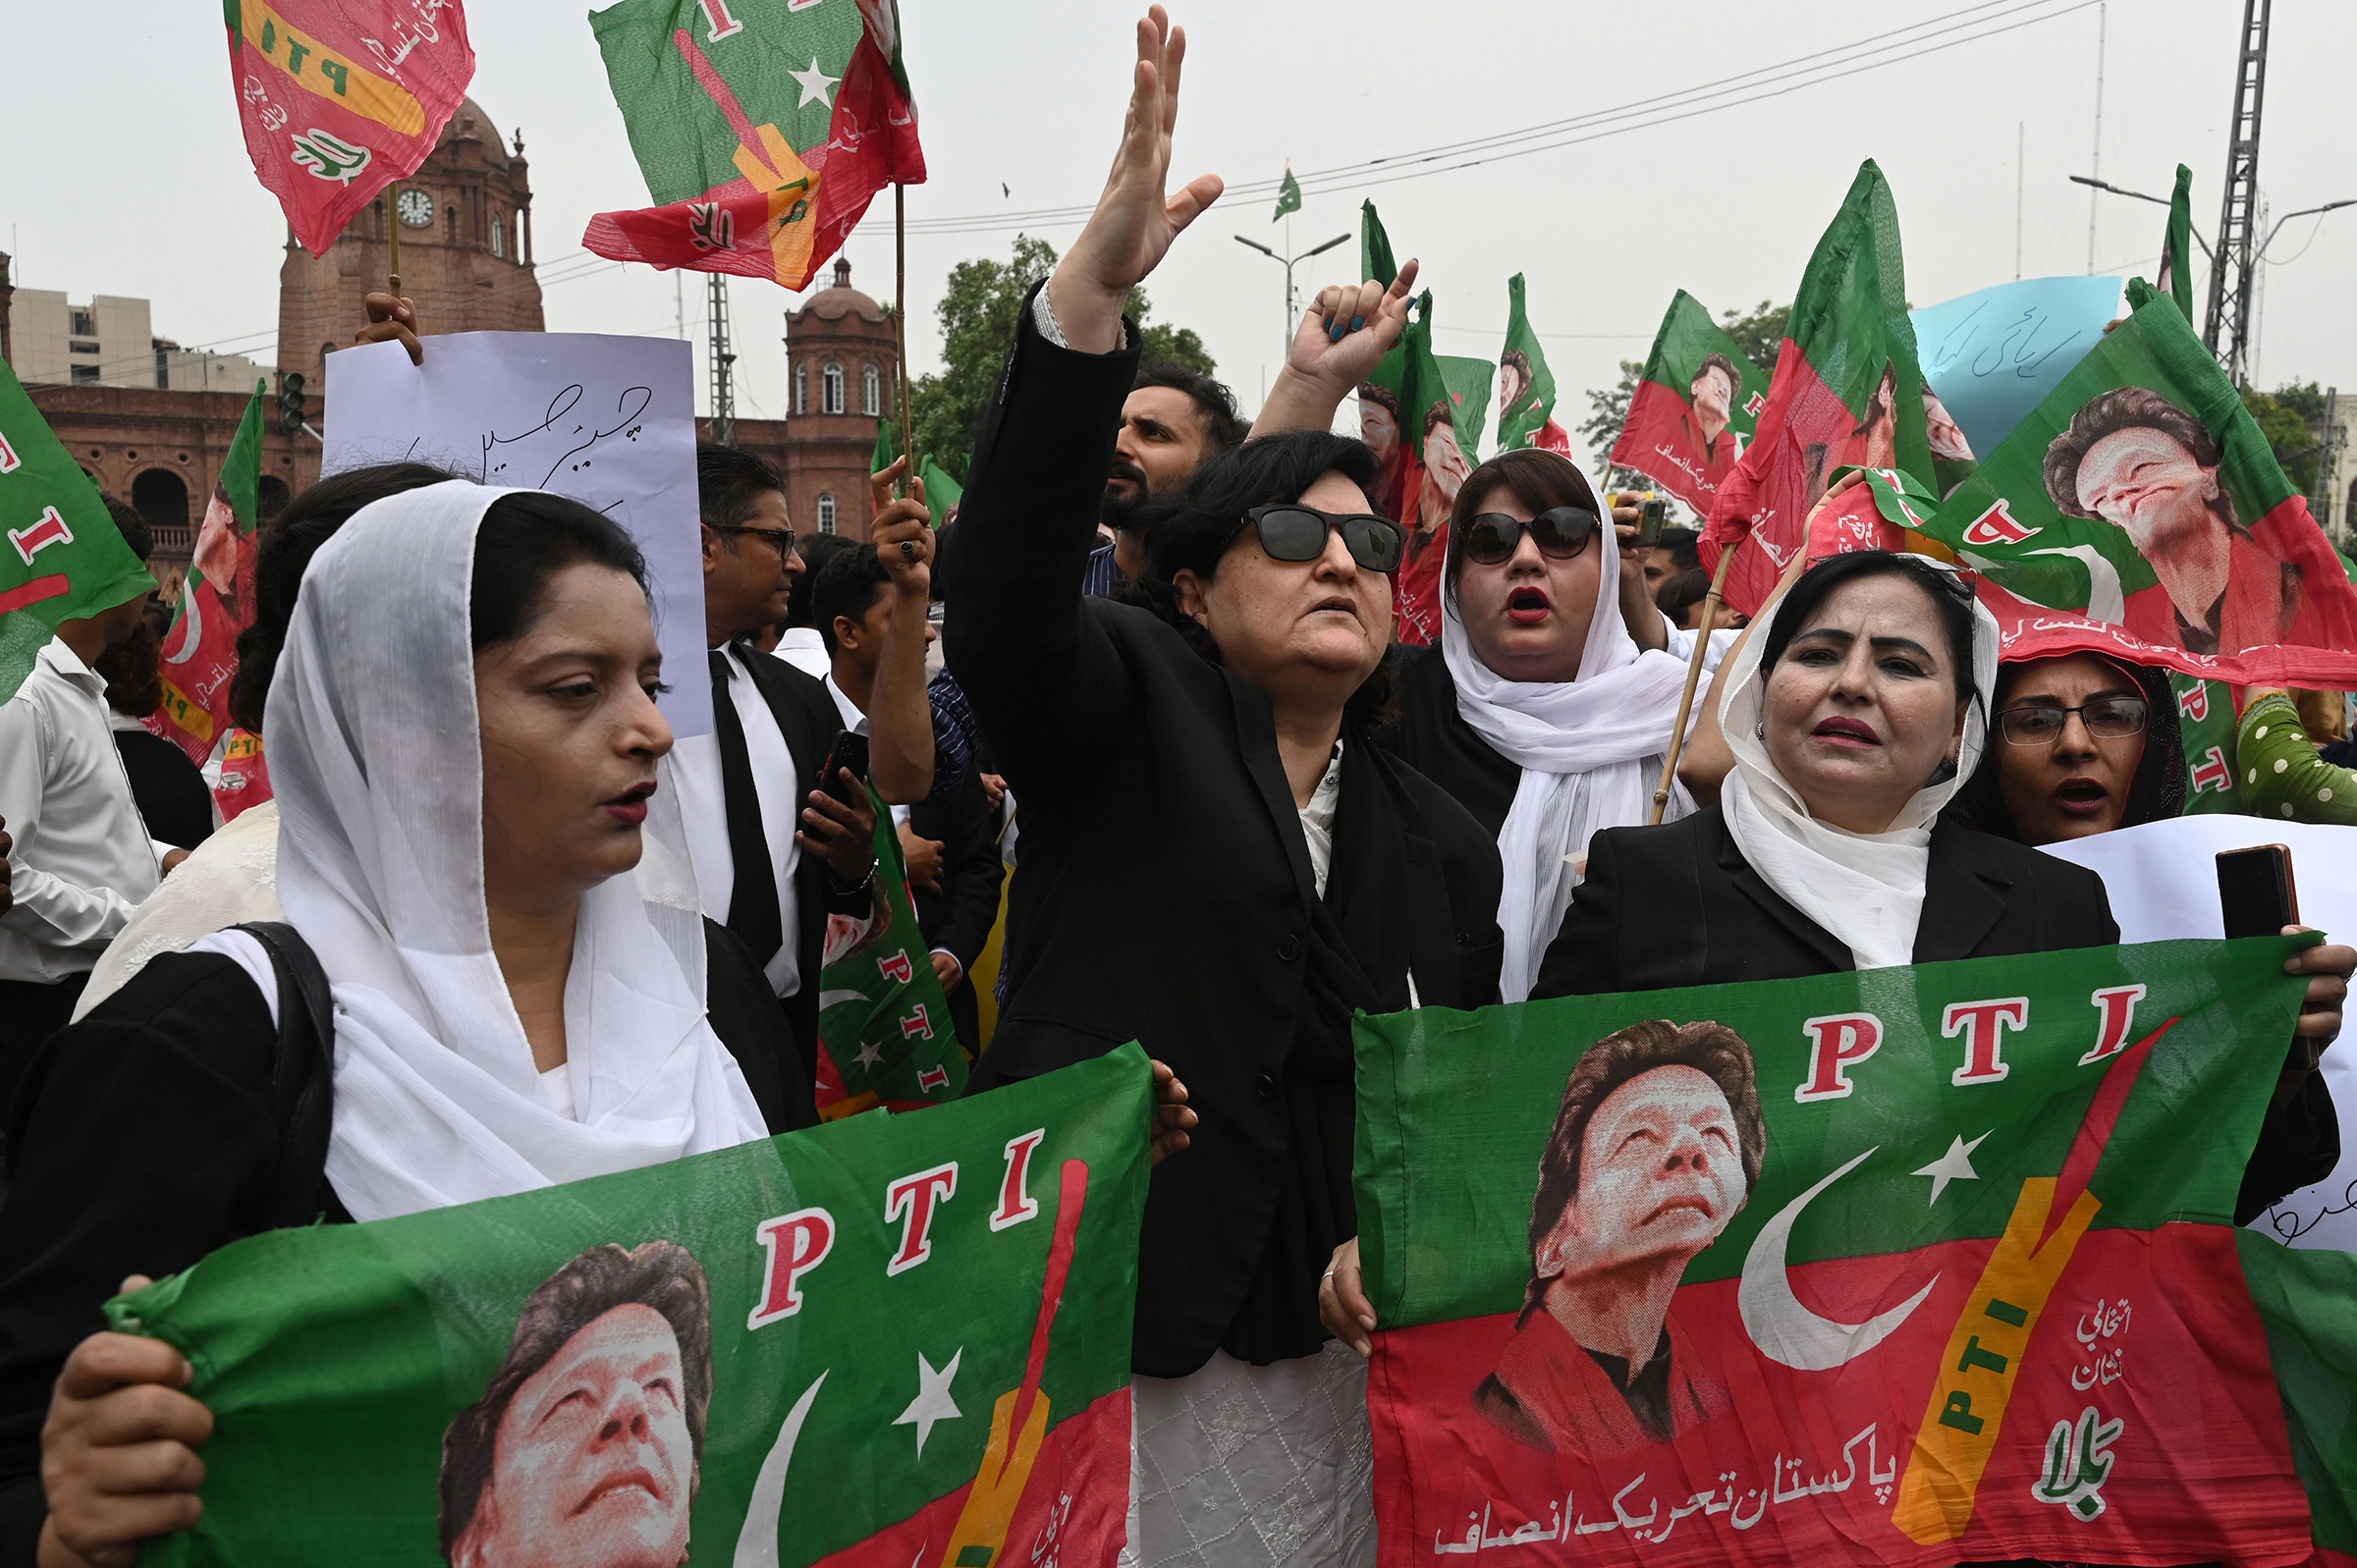 Supporters of the Pakistan Tehrik-i-Insaf (PTI) party gather in protest after former Pakistani Prime Minister Imran Khan's arrest, outside the High court in Lahore, Pakistan, on Aug. 7.